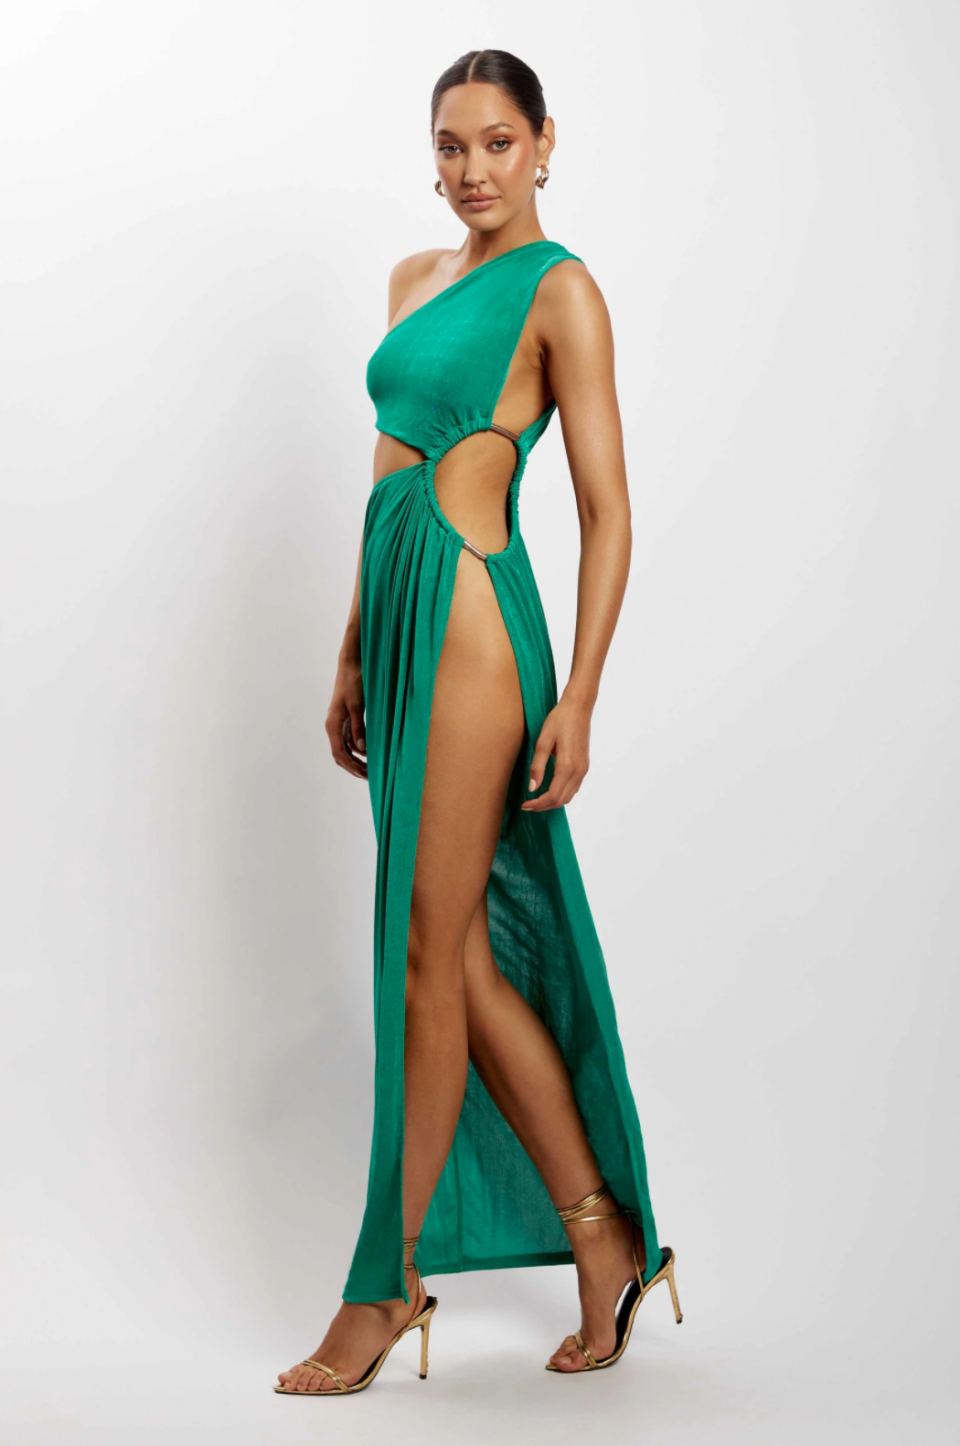 Woman with dark hair tied back wears a long green MESHKI PAIGE Ruched Side Cut Out Maxi Dress split on one side to the waist, with strappy high heels.